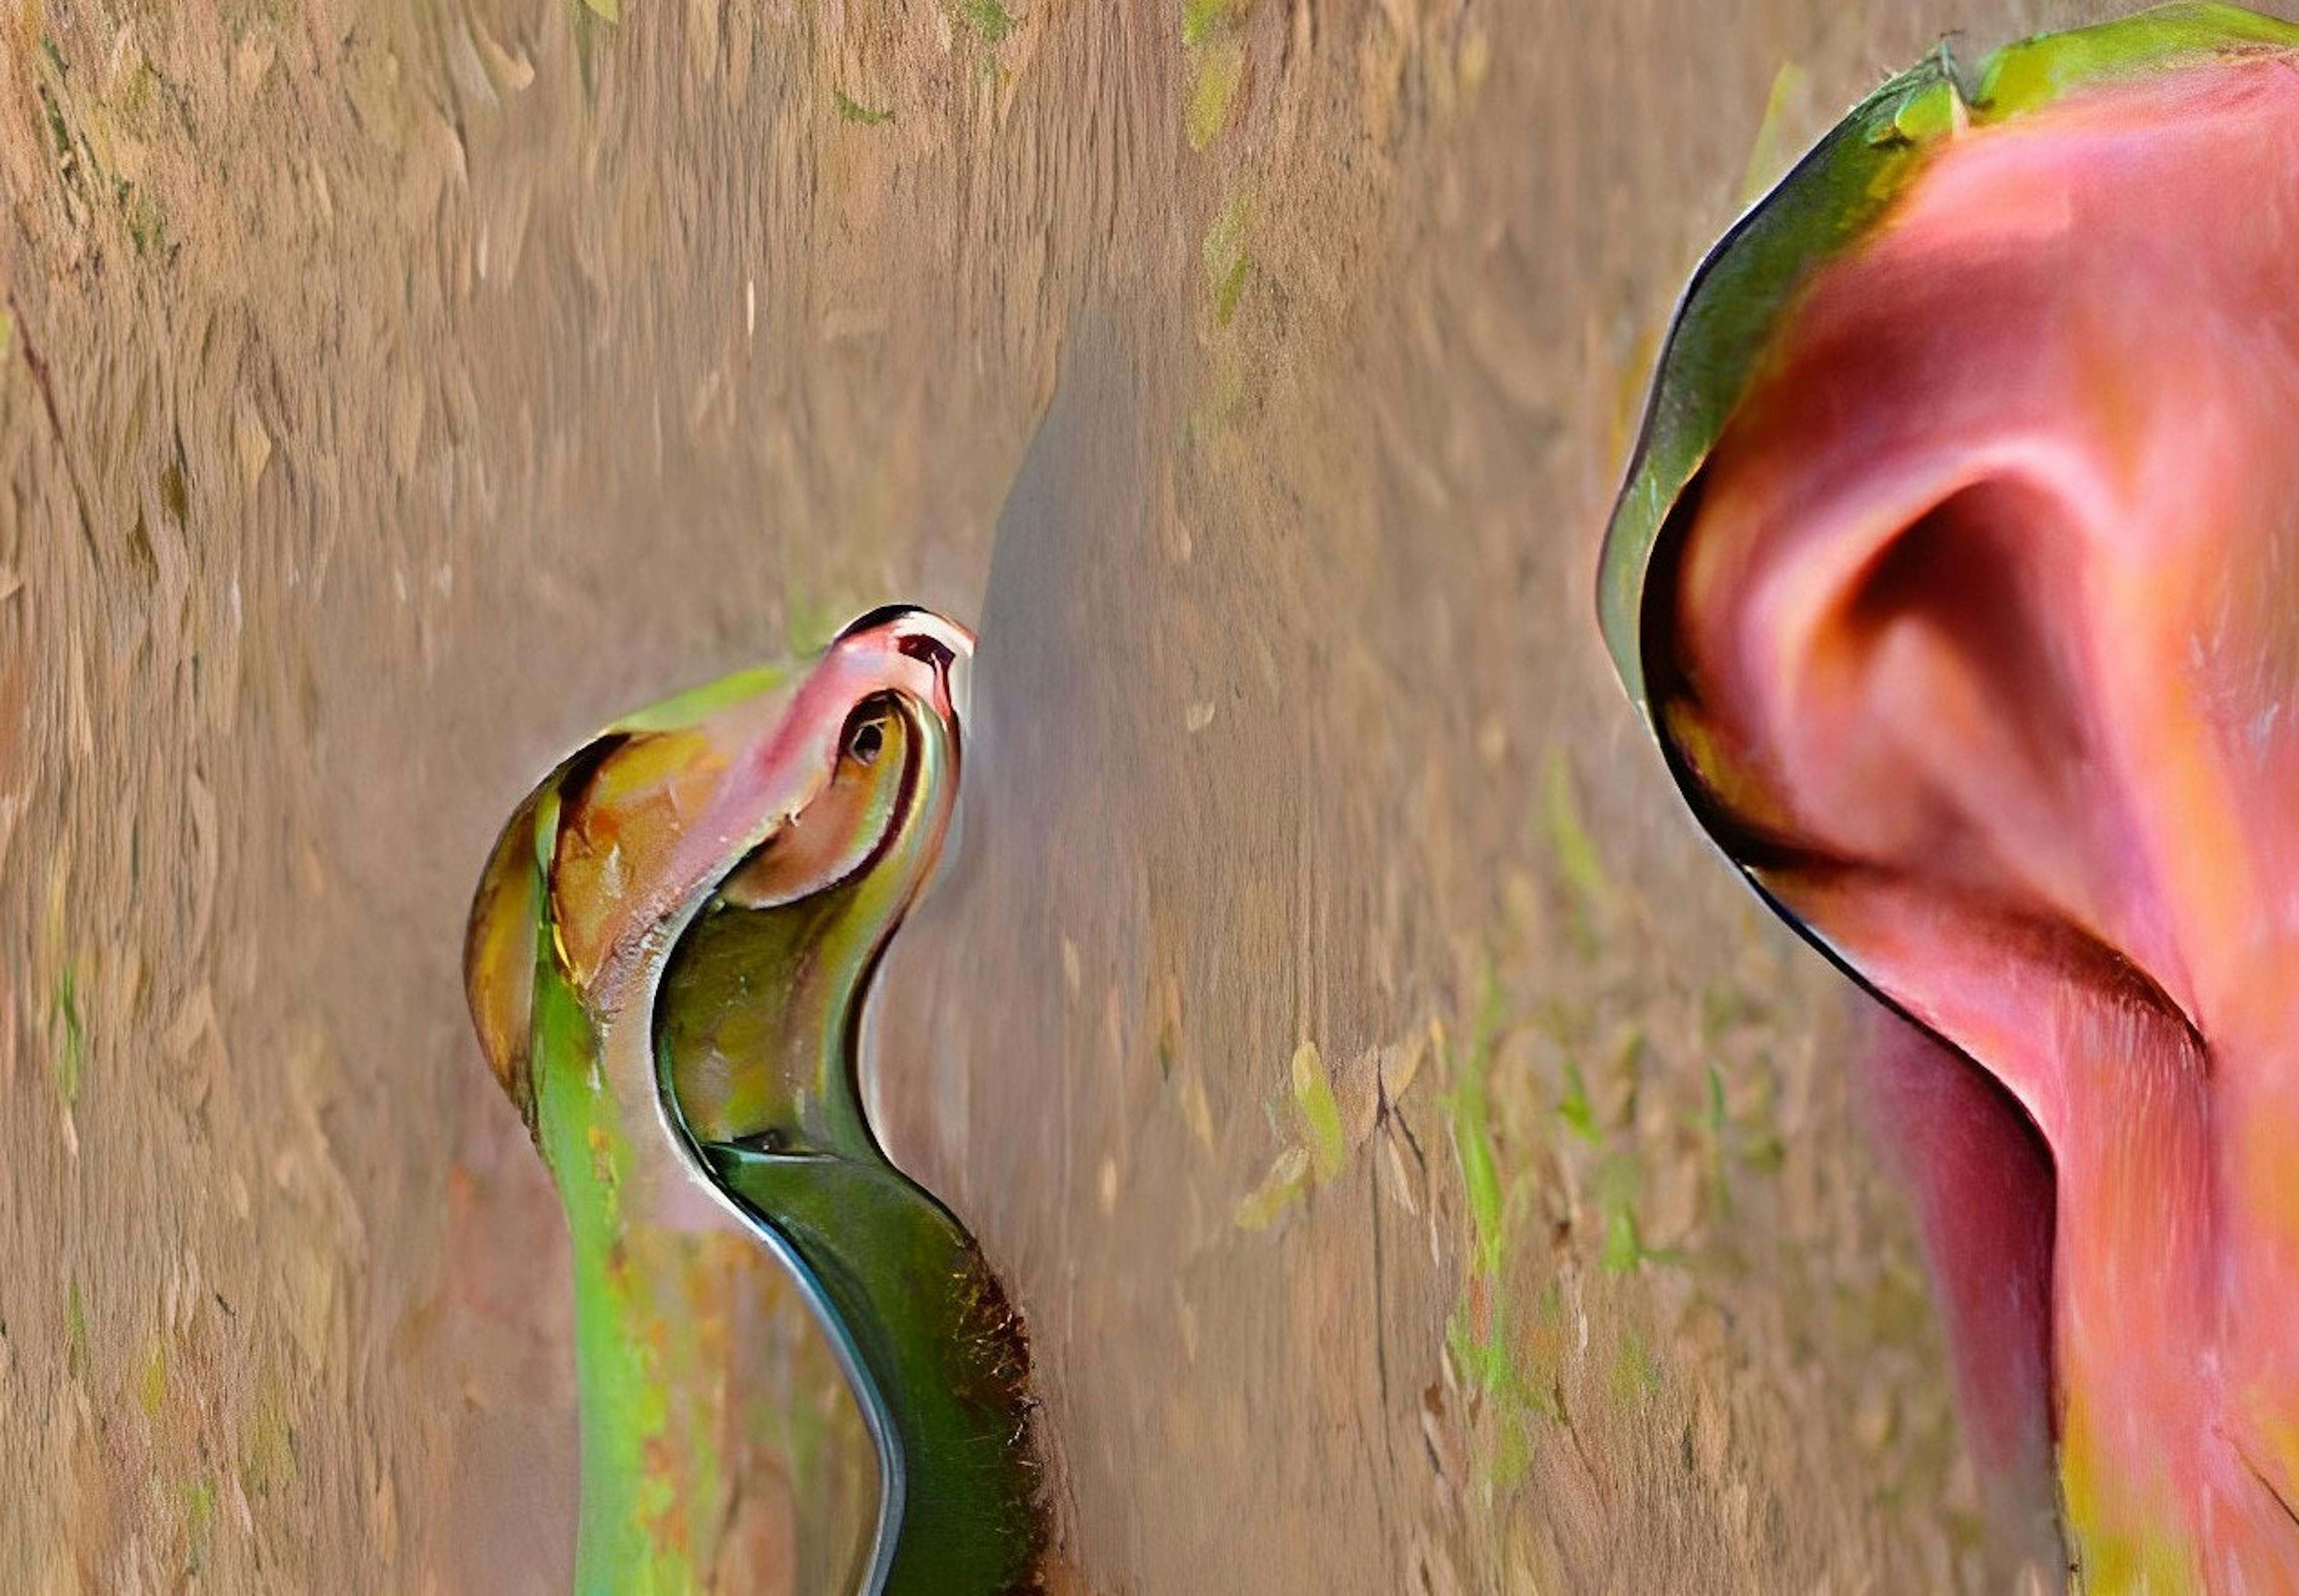 “Serpent to Ear”, AI-generated @ Dream by Wombo